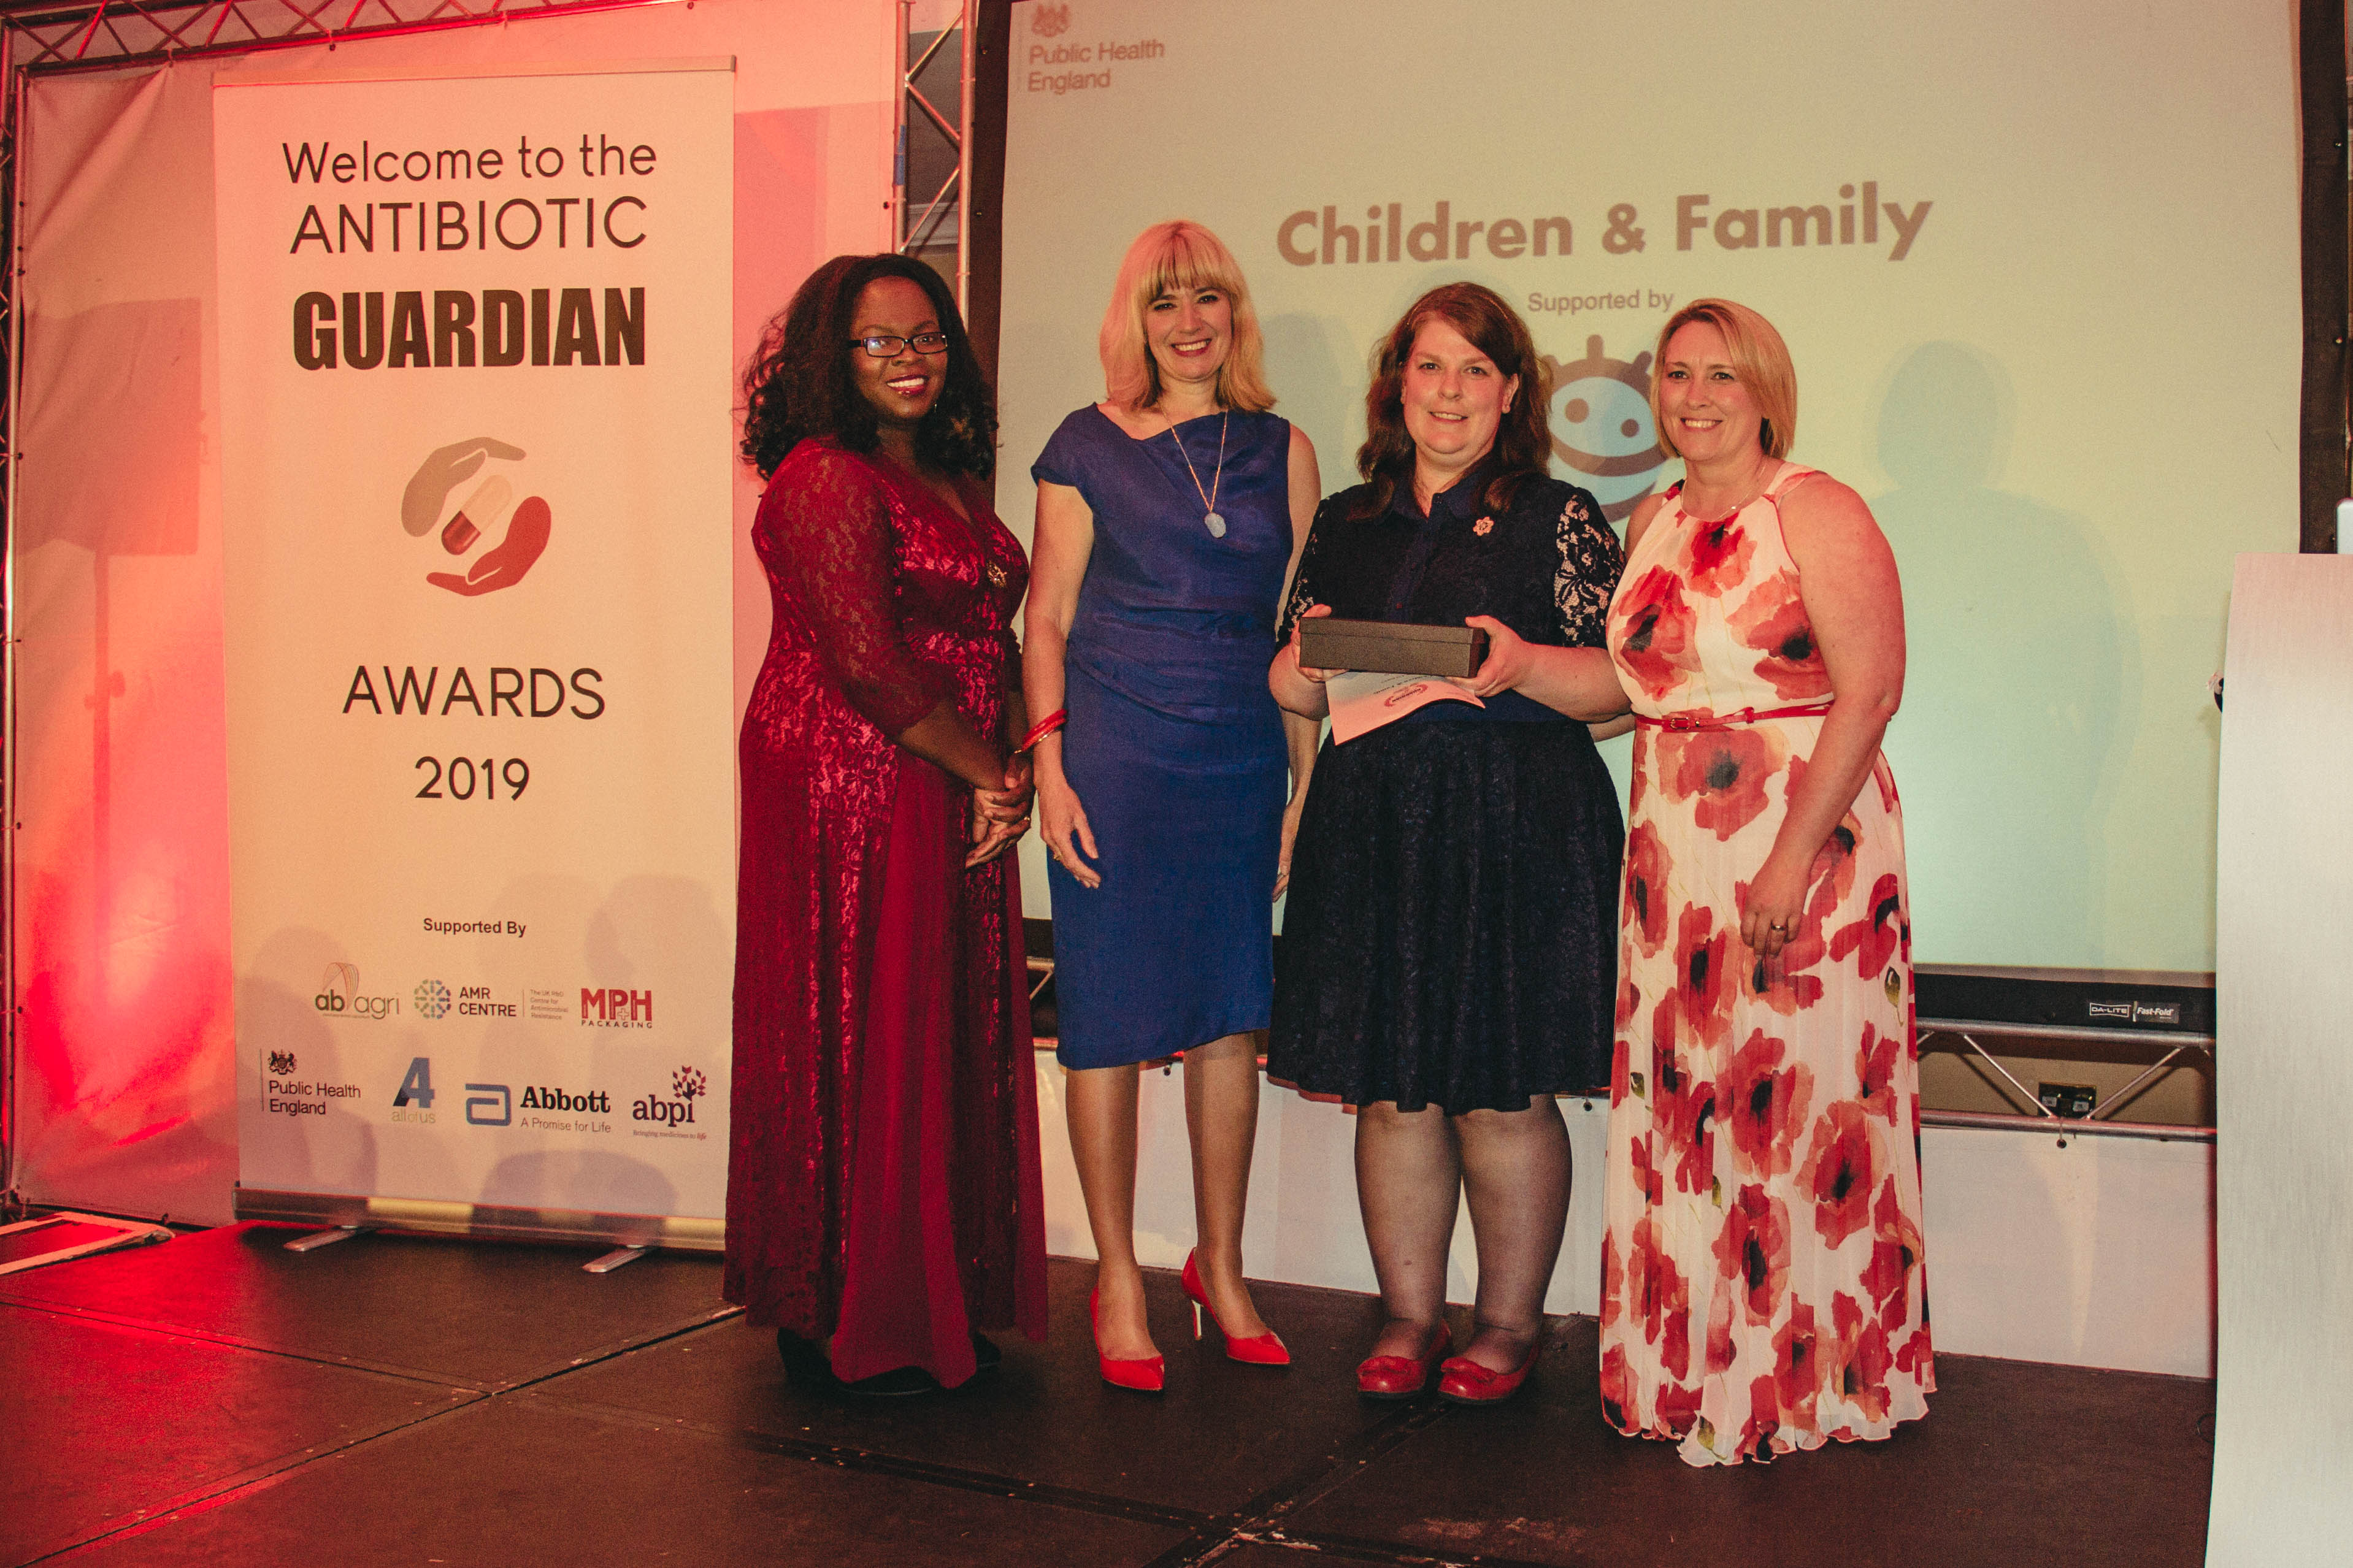 Catriona Innes (black dress) collected the award on behalf of the joint initiative at the event in Birmingham.